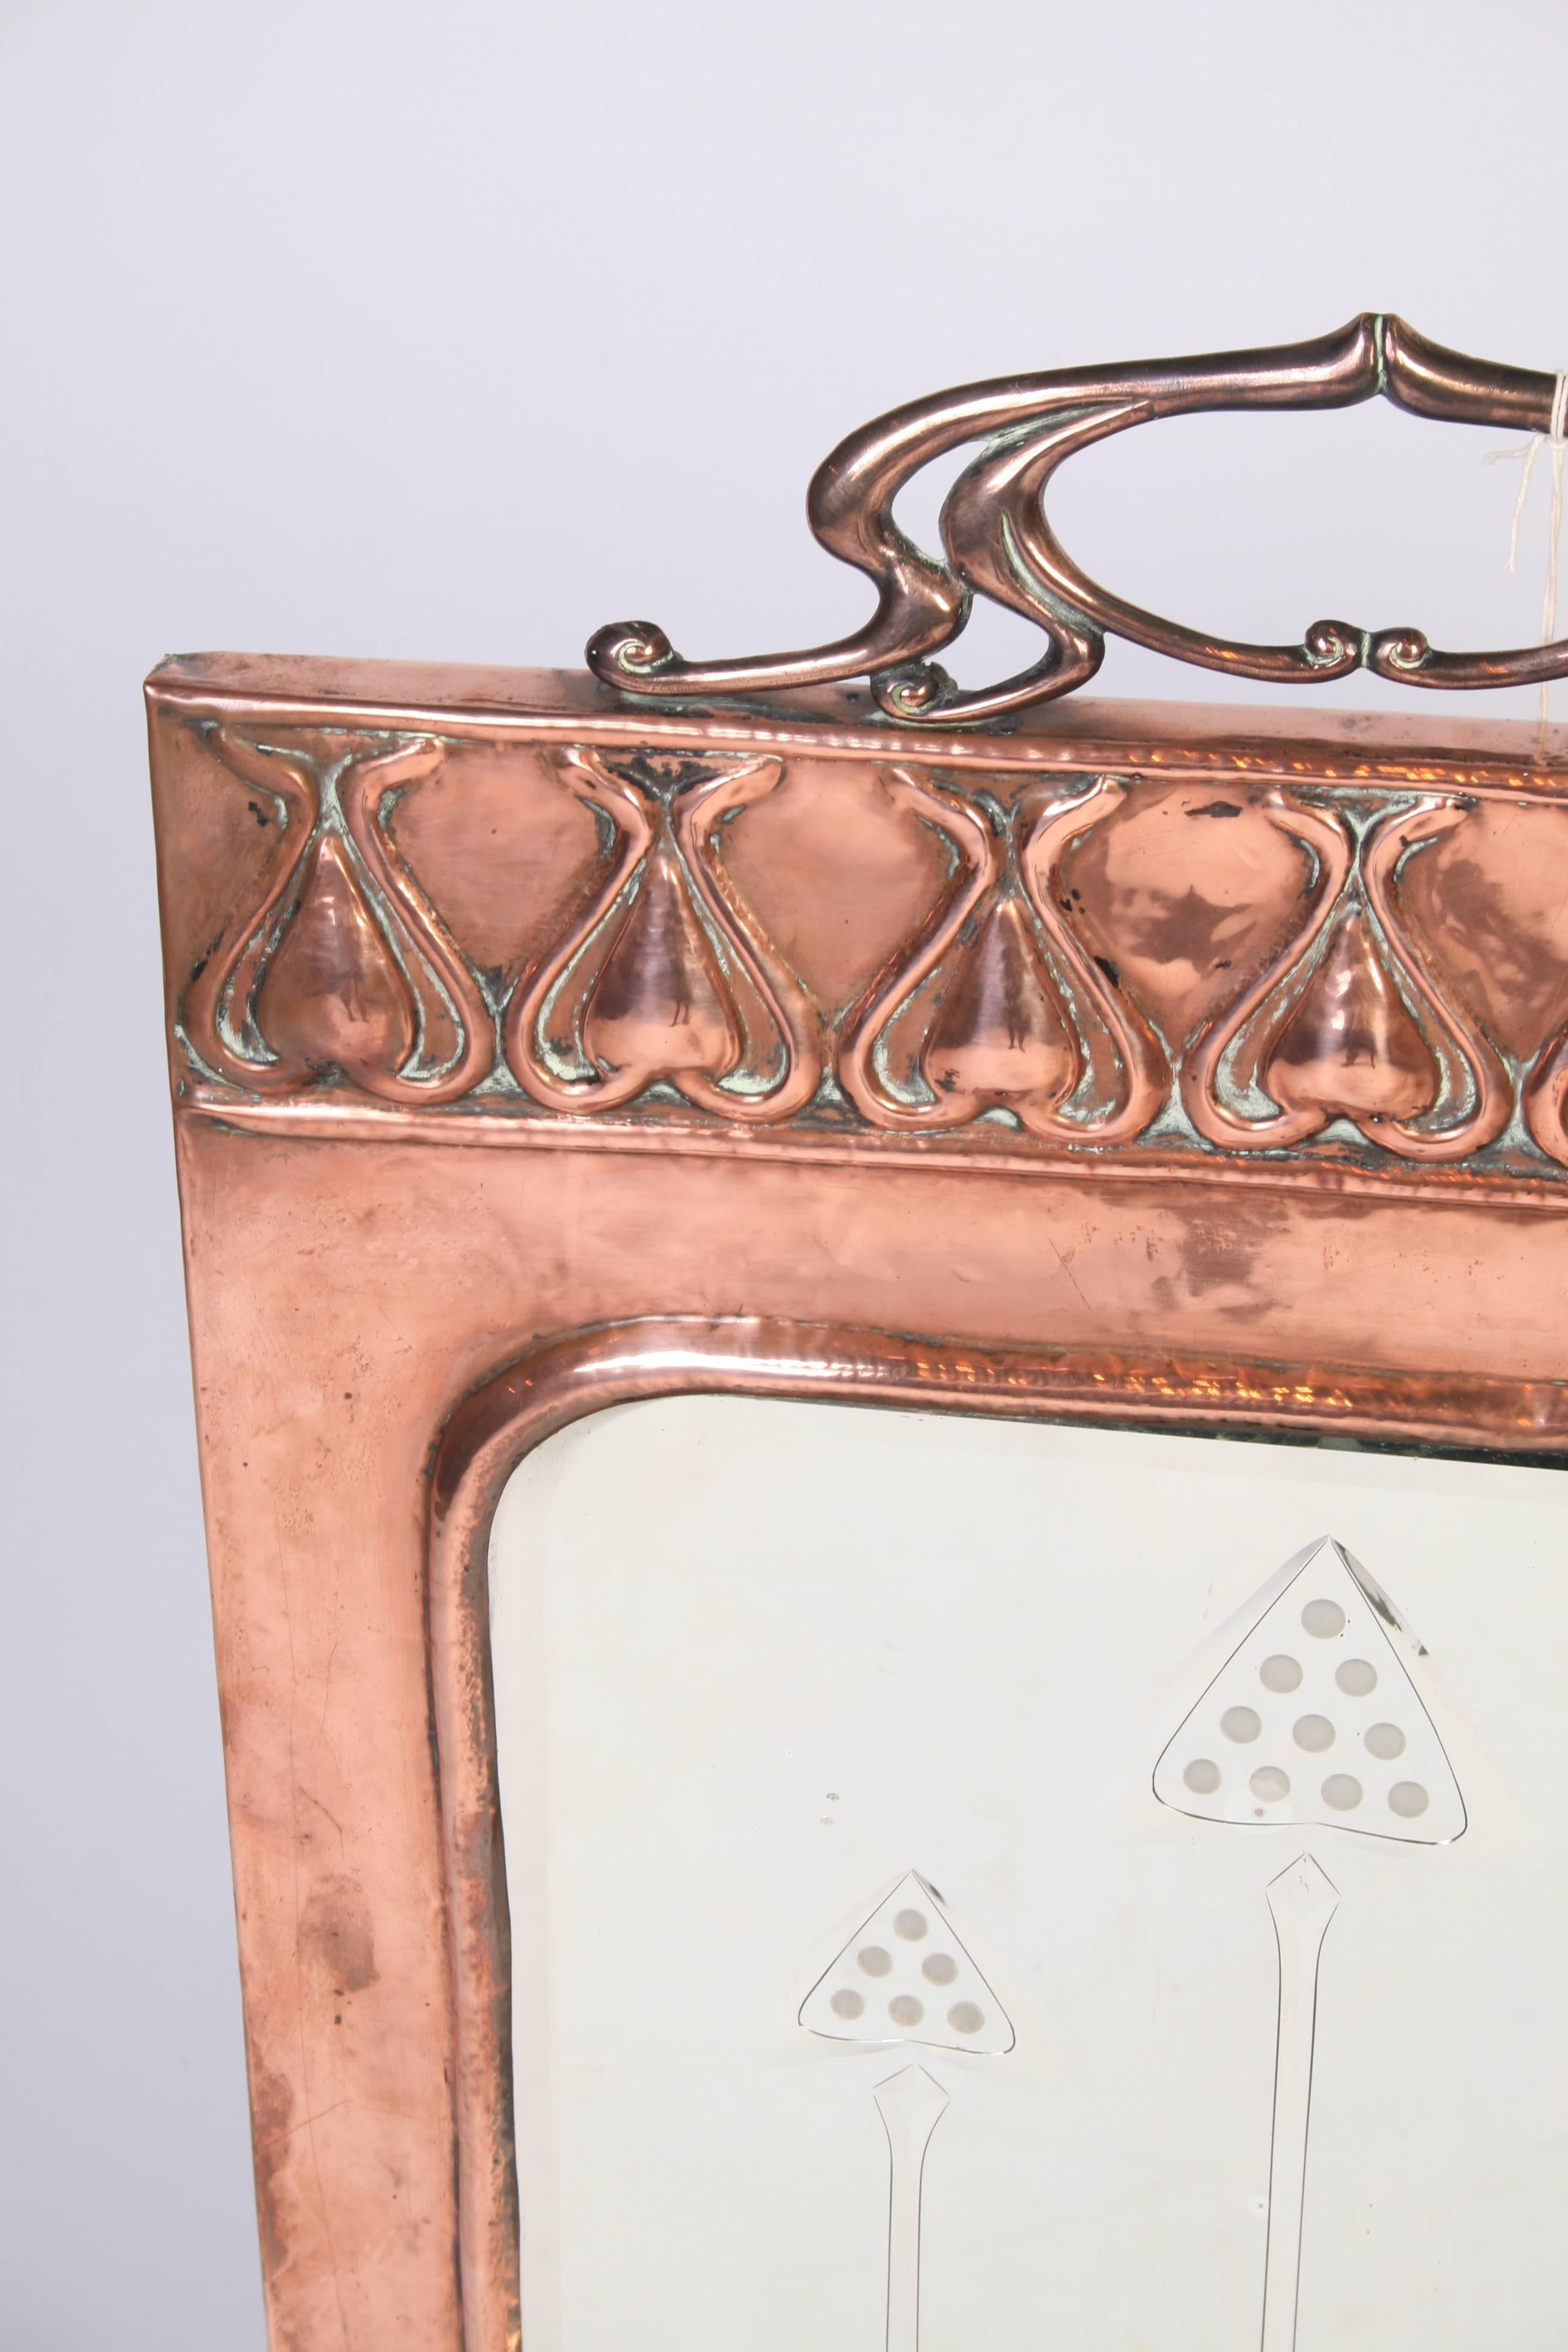 A stylish late 19th century copper fire screen having an etched inset mirror with styilized pattern above.